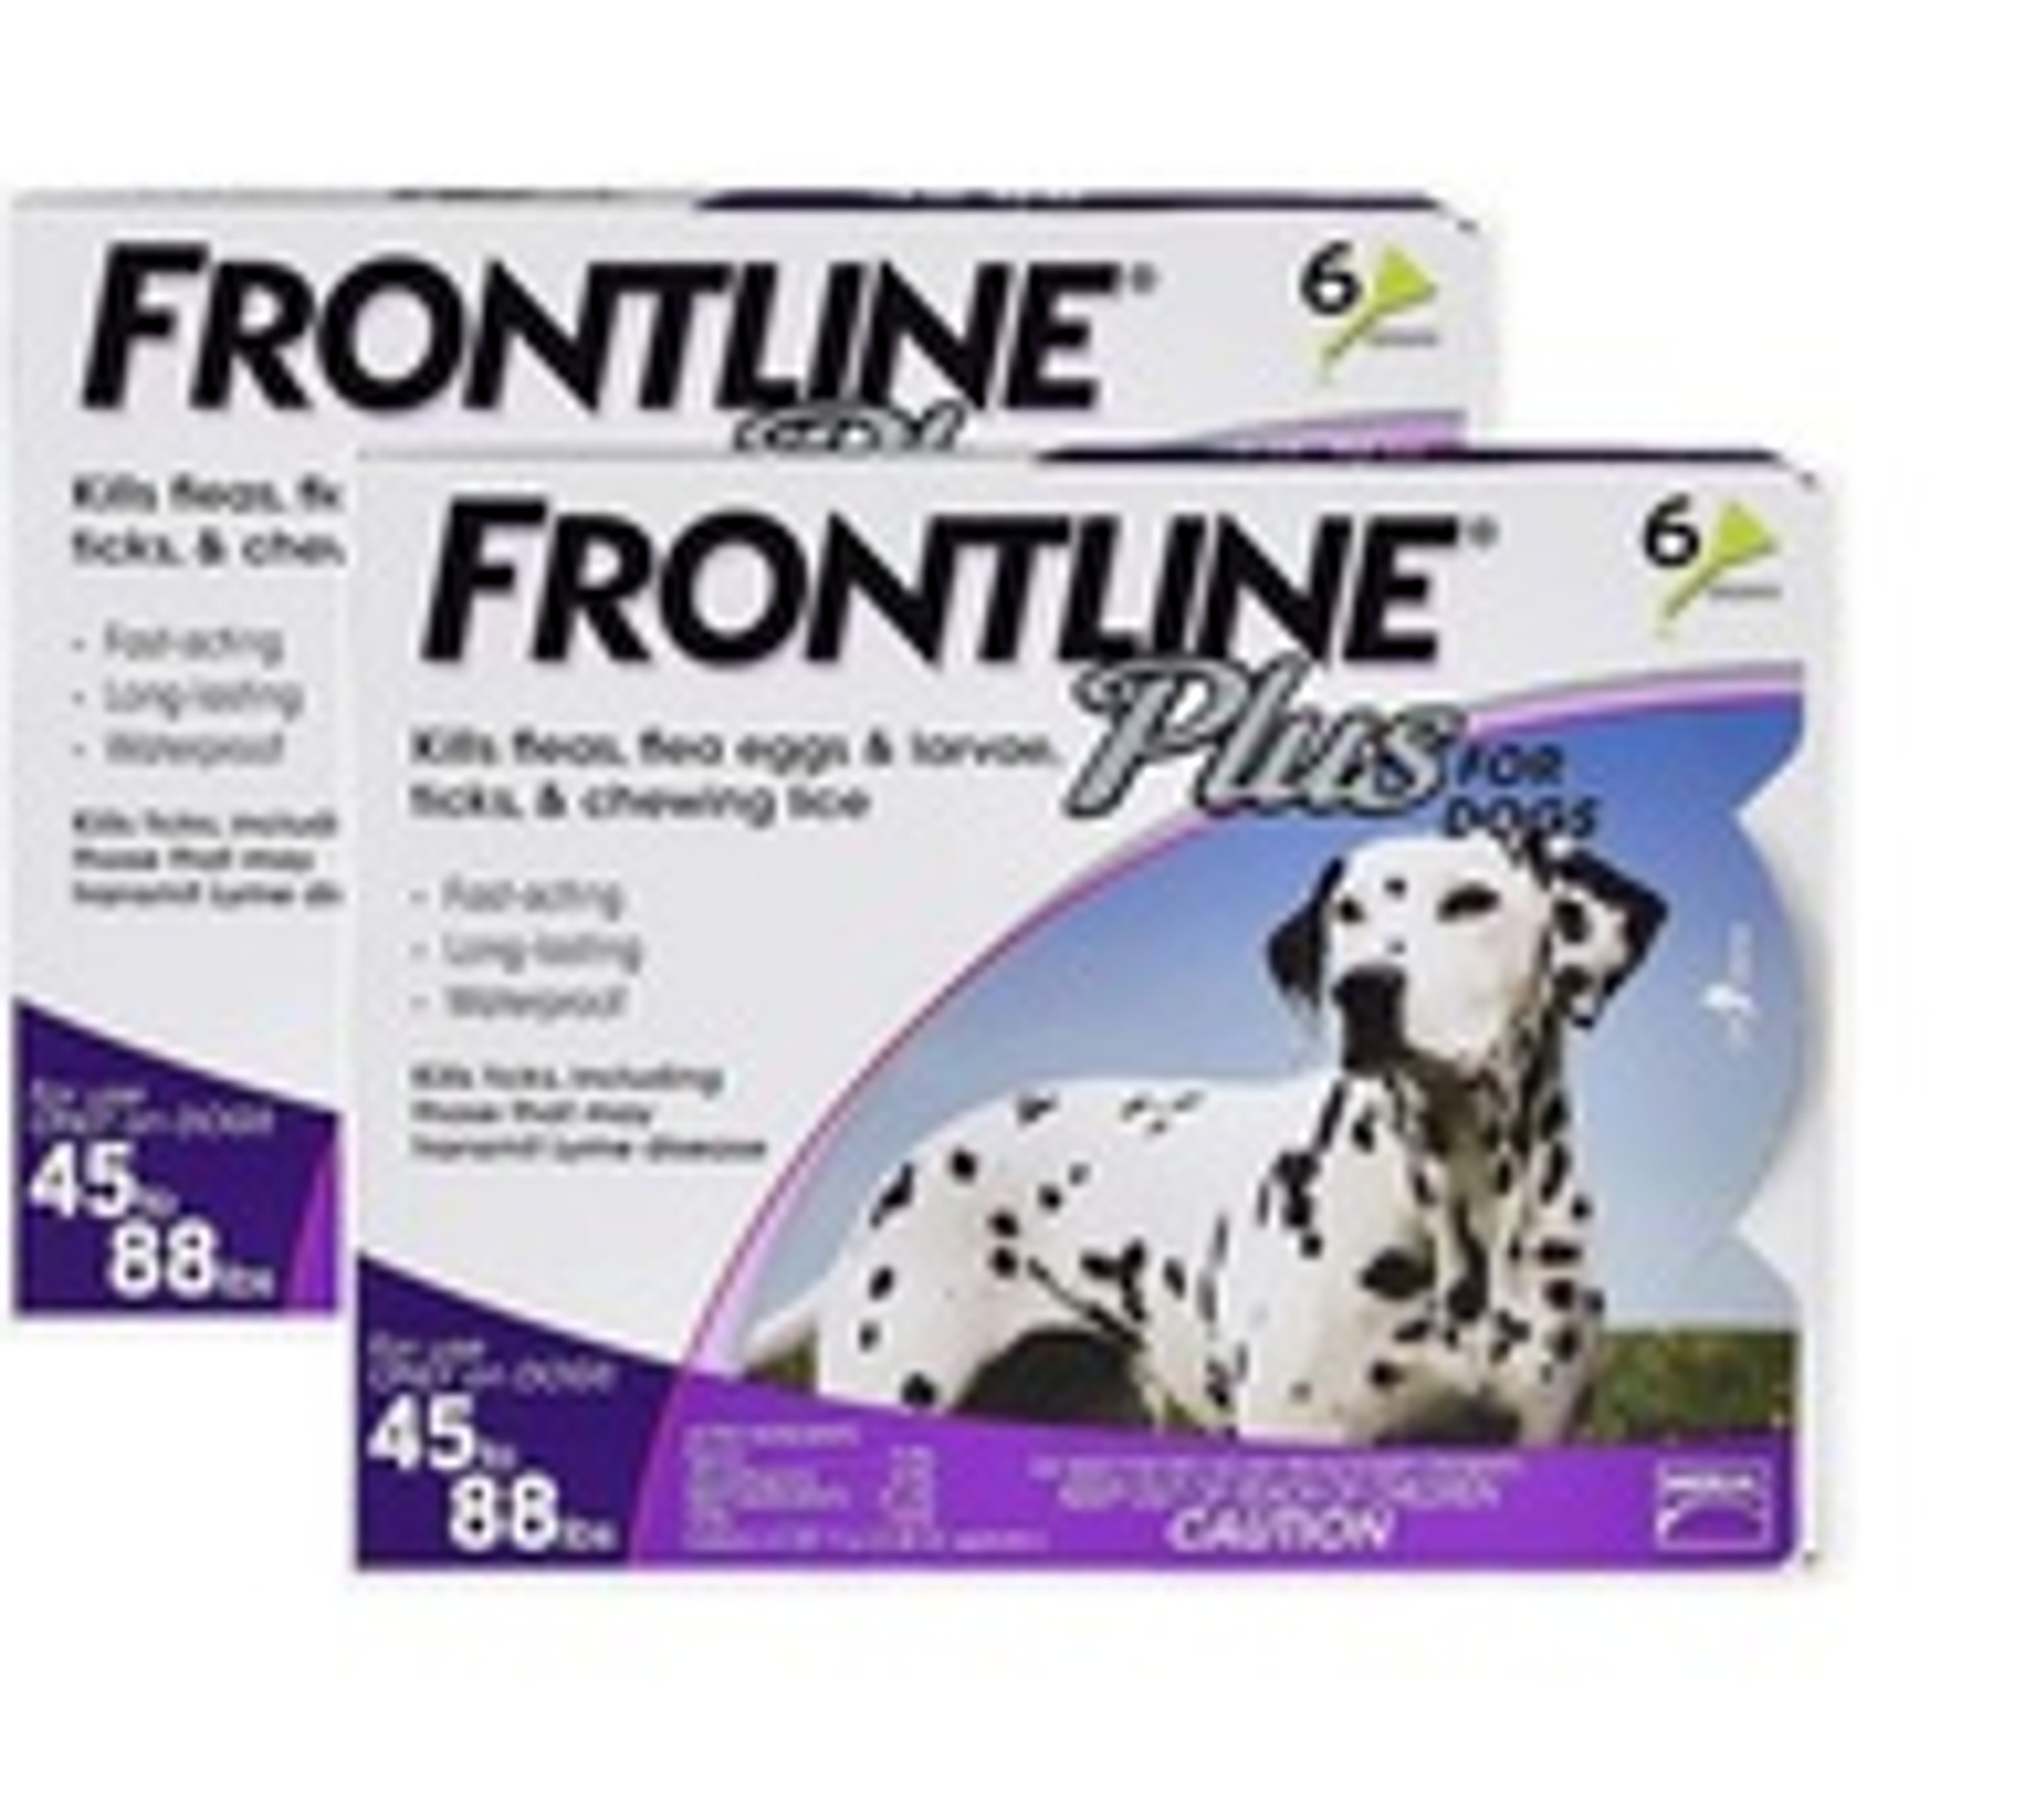 frontline plus for dogs cheap